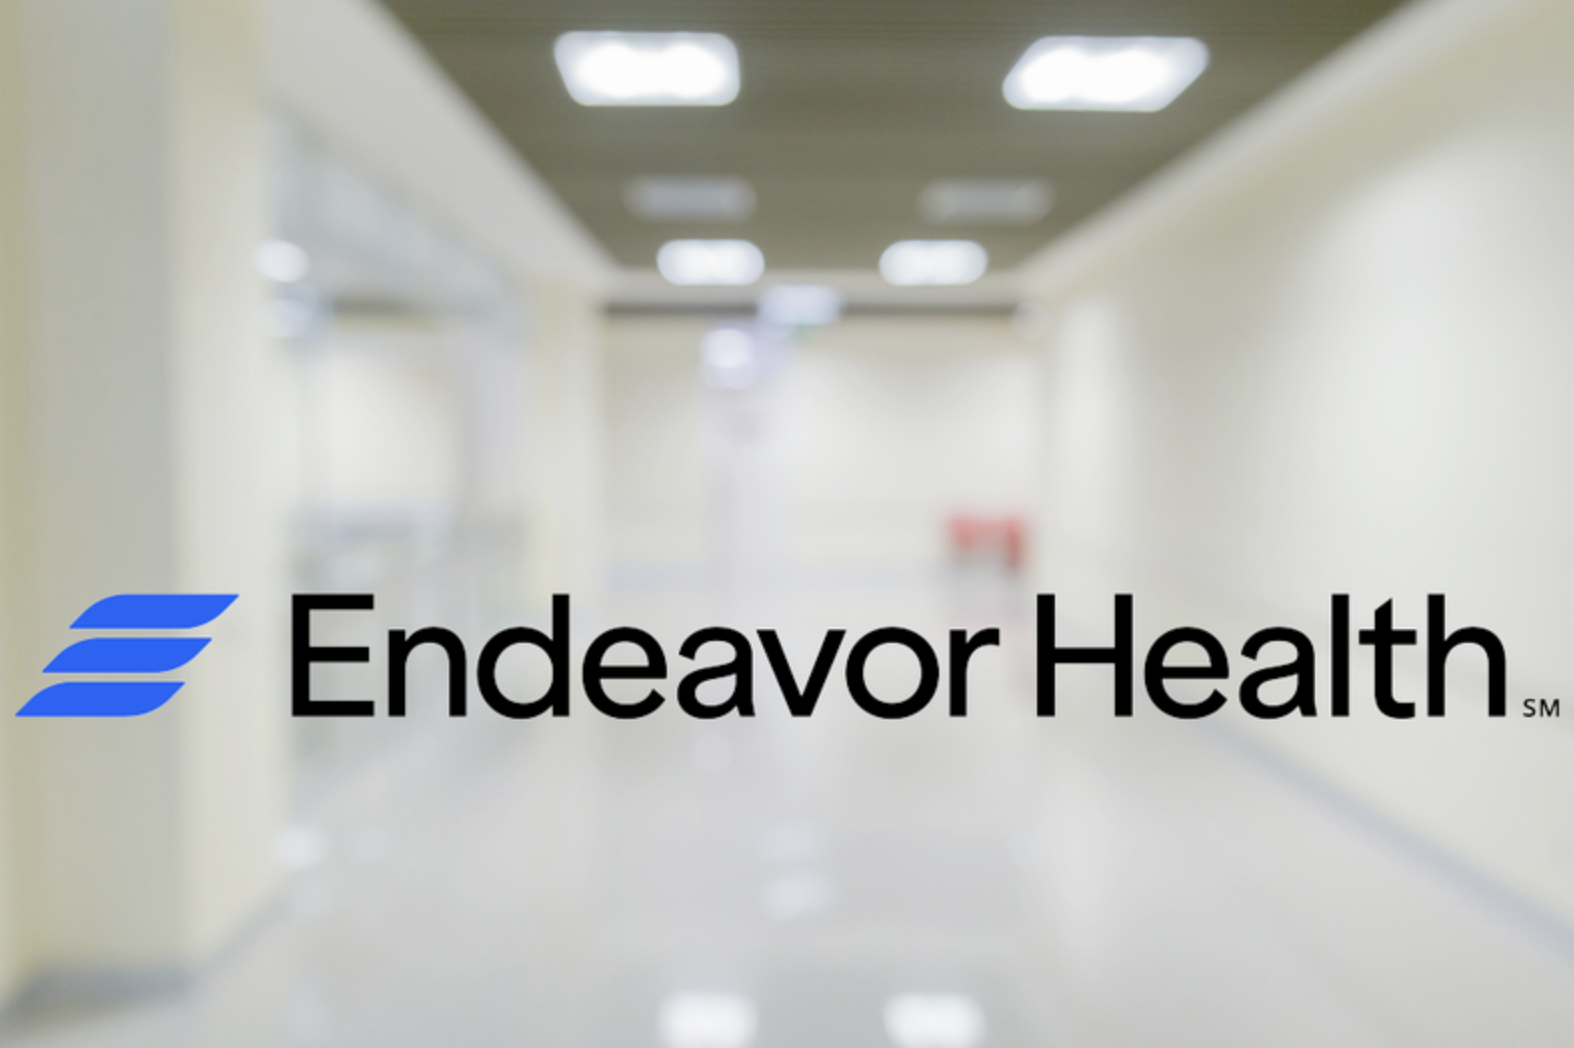 Former patients of Fabio Ortega say Endeavor Health failed to protect them from an abusive doctor